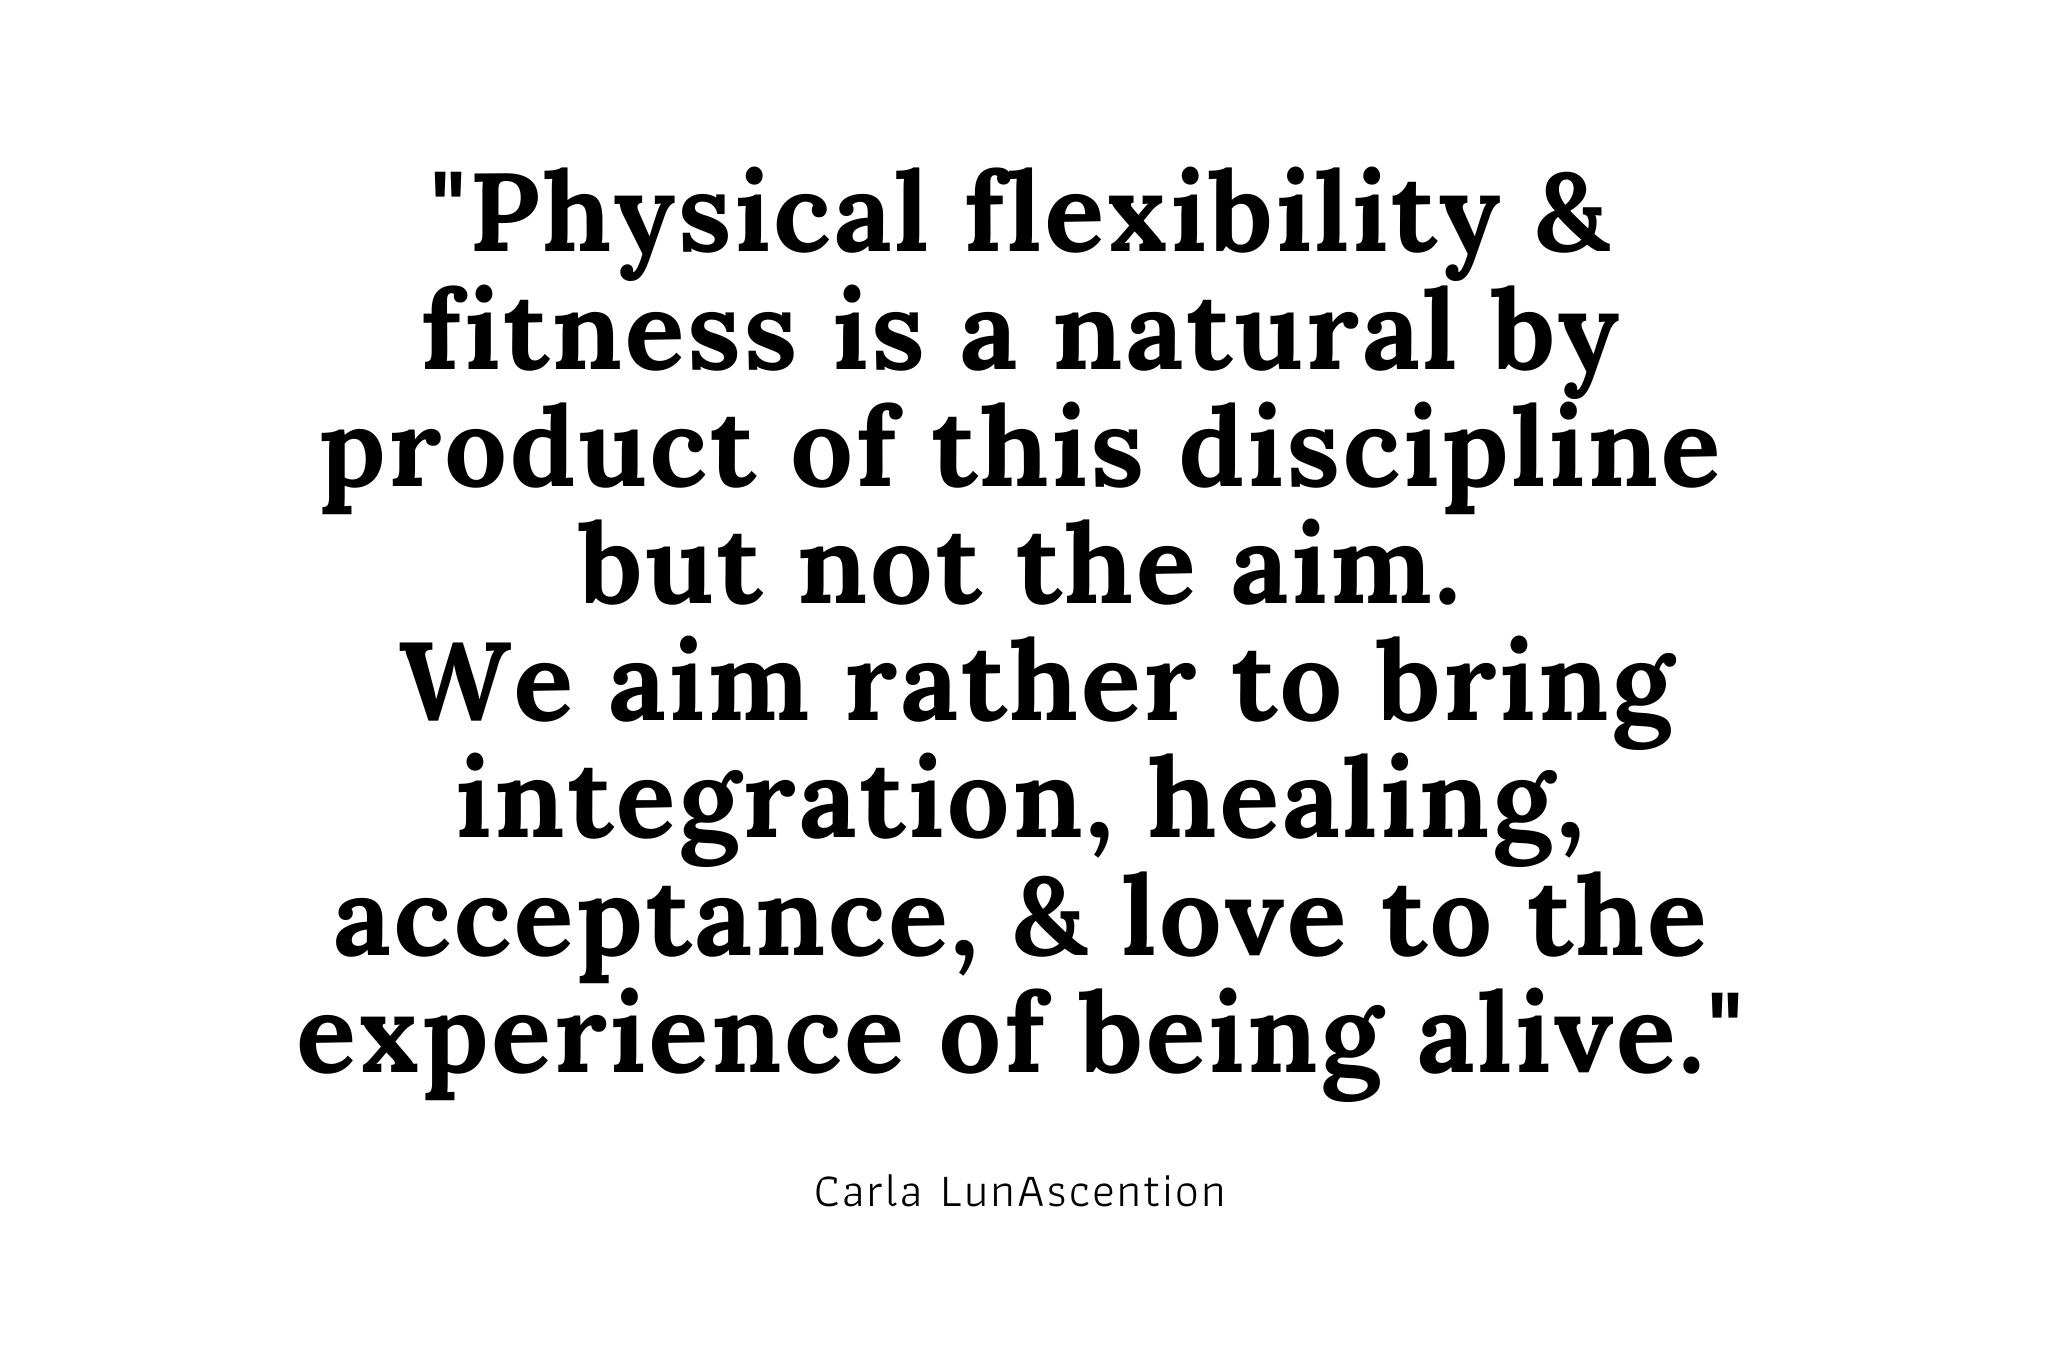 Yoga Quote by Carla LunAscention, Psychic and Yoga Teacher "Yoga is not about attaining the perfect posture. It is about mindfulness. It is not about being super flexible and fit. It is about meeting yourself where you are."